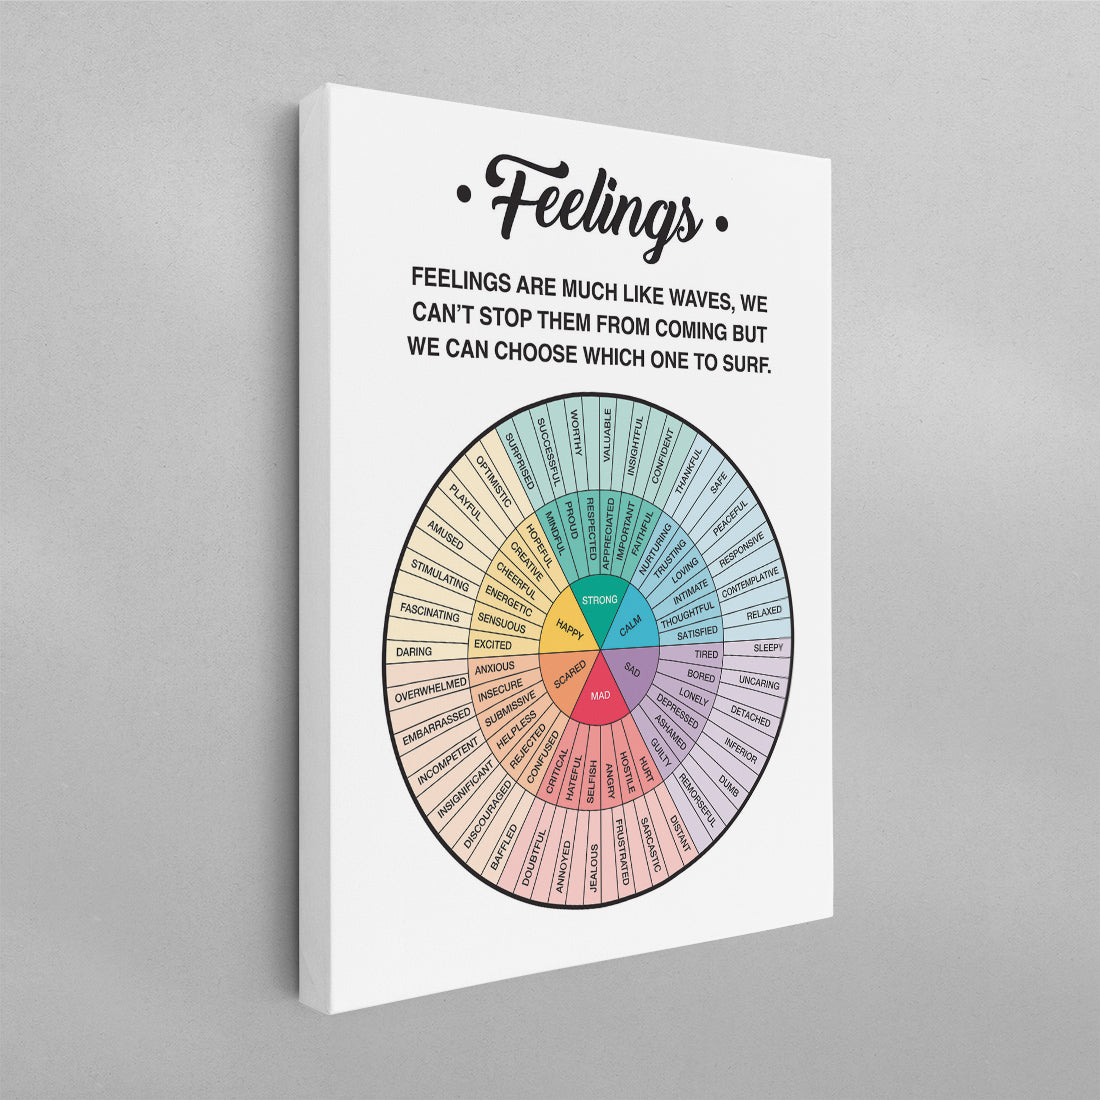 Feelings Wheel Chart Diagram with Quote